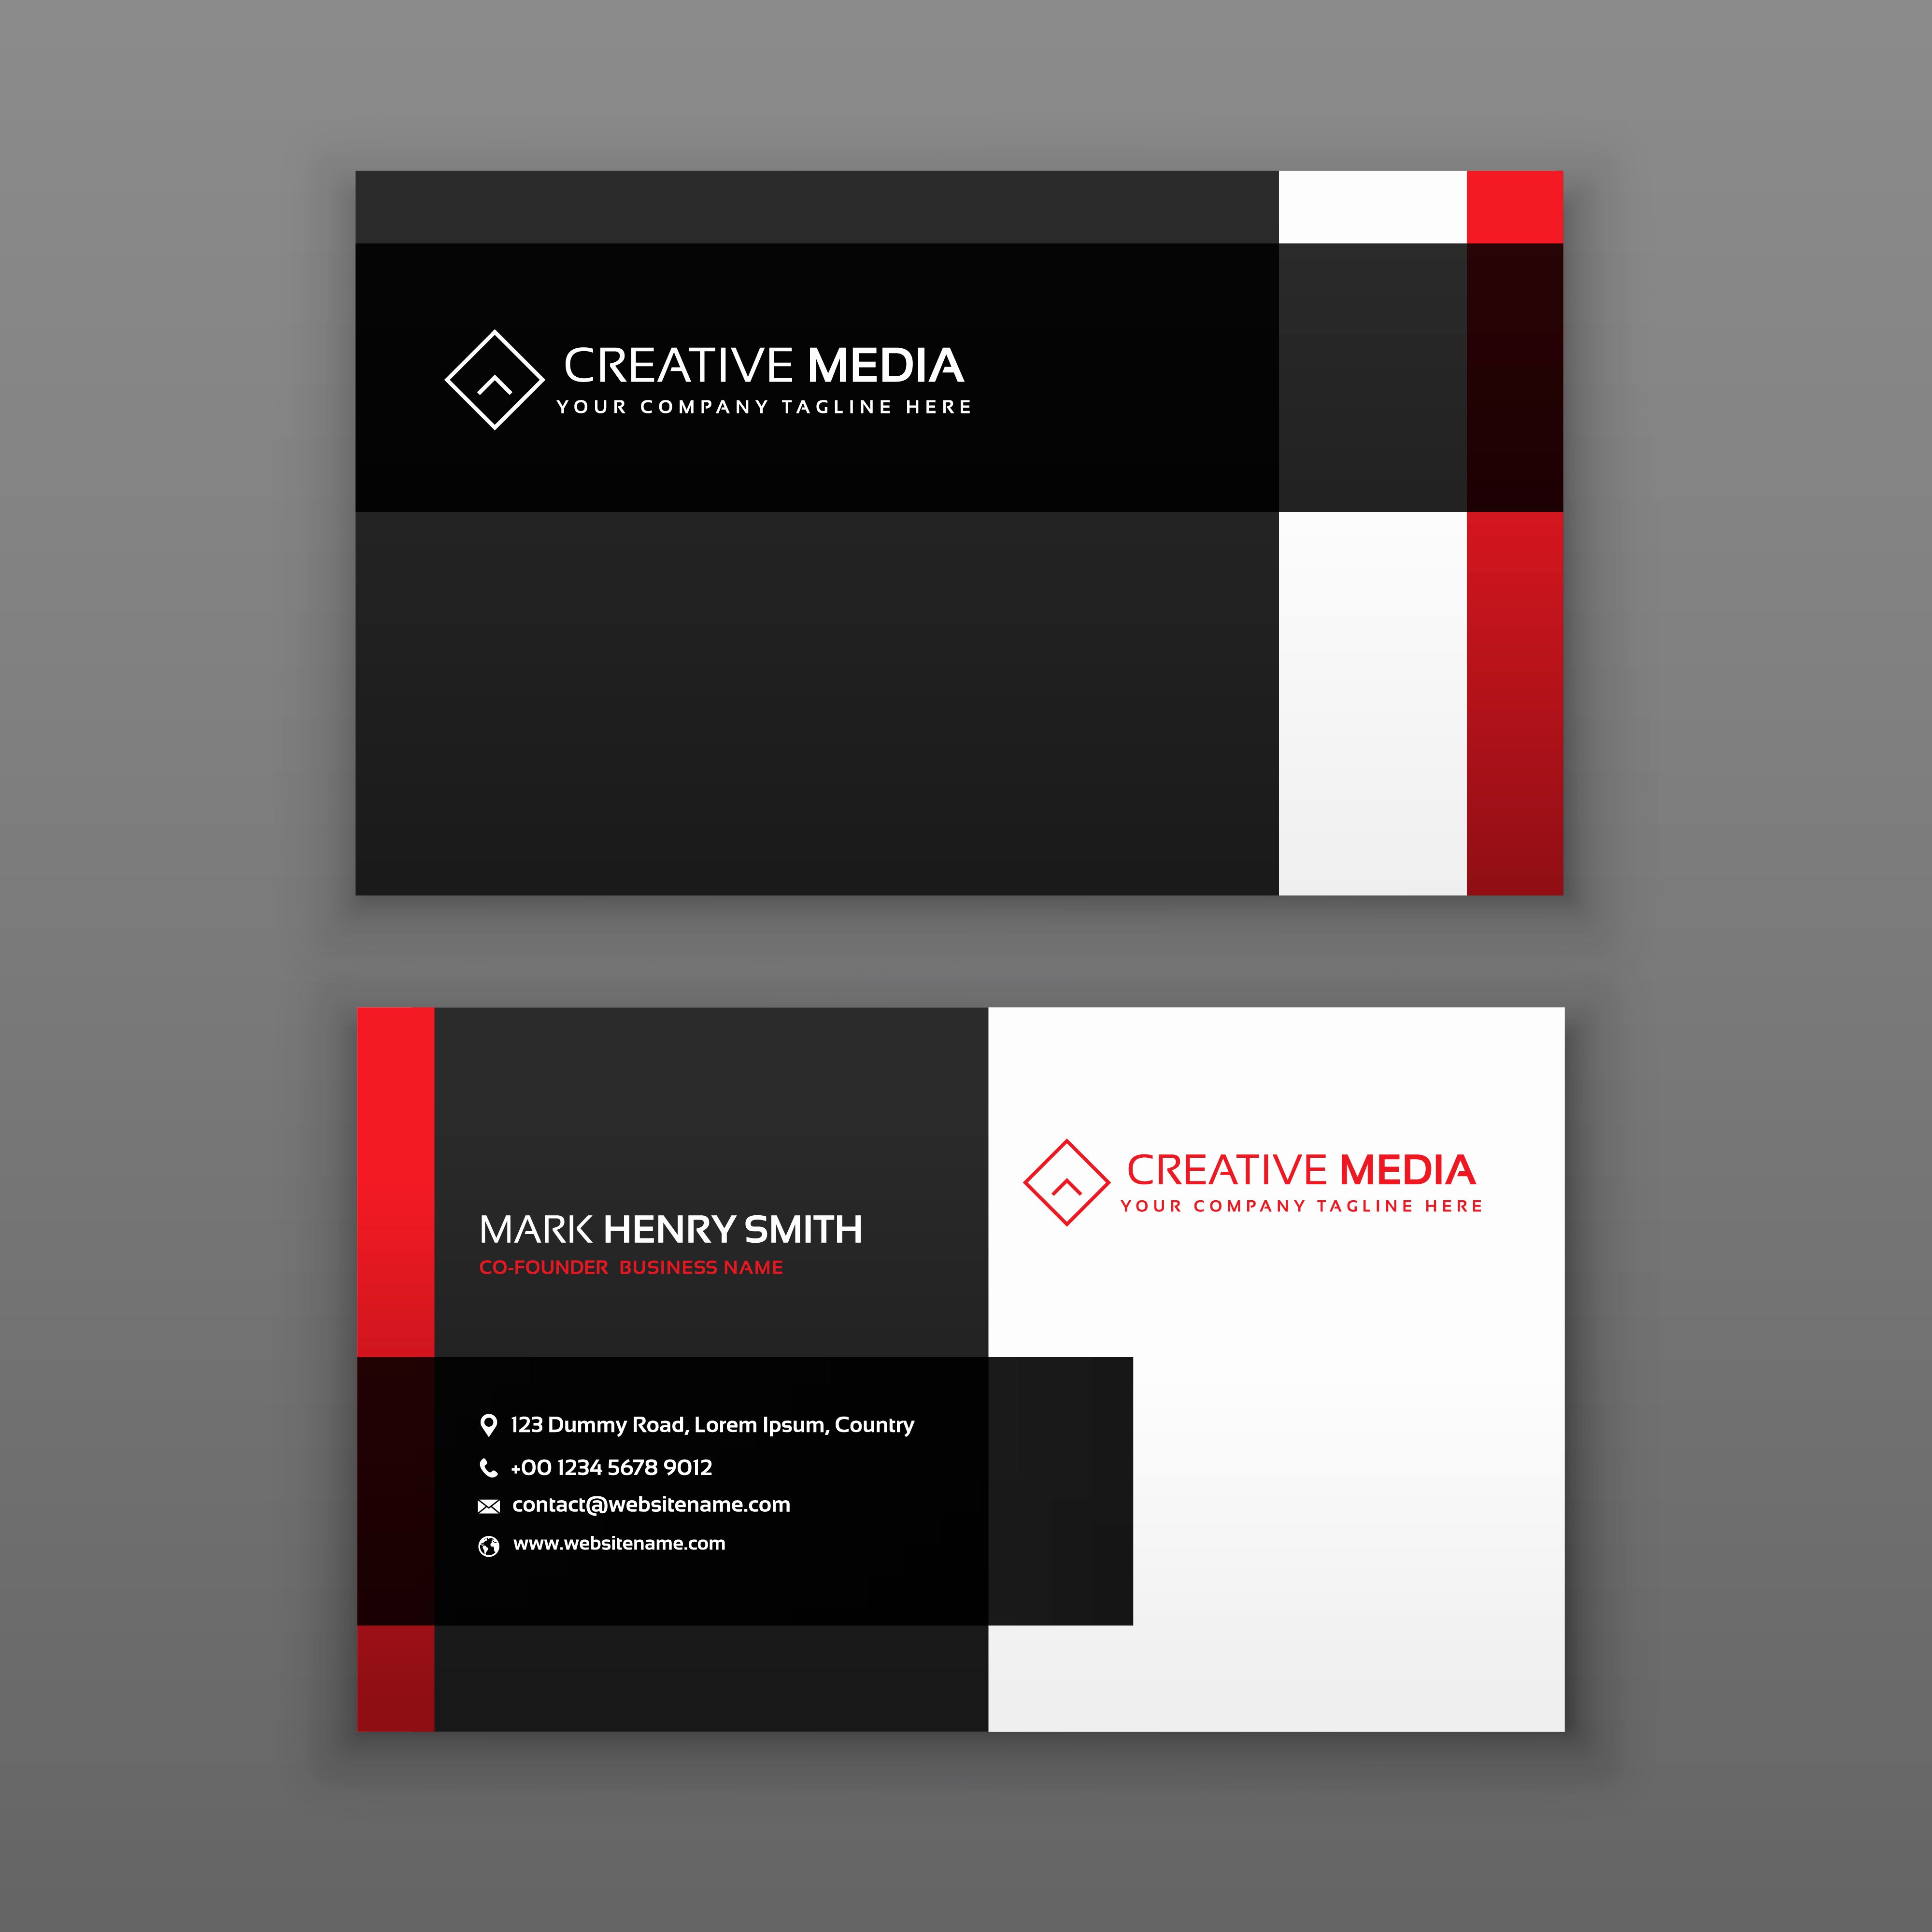 Black and Red Business Cards Awesome Red and Black Professional Business Card Design Download Free Vector Art Stock Graphics &amp;